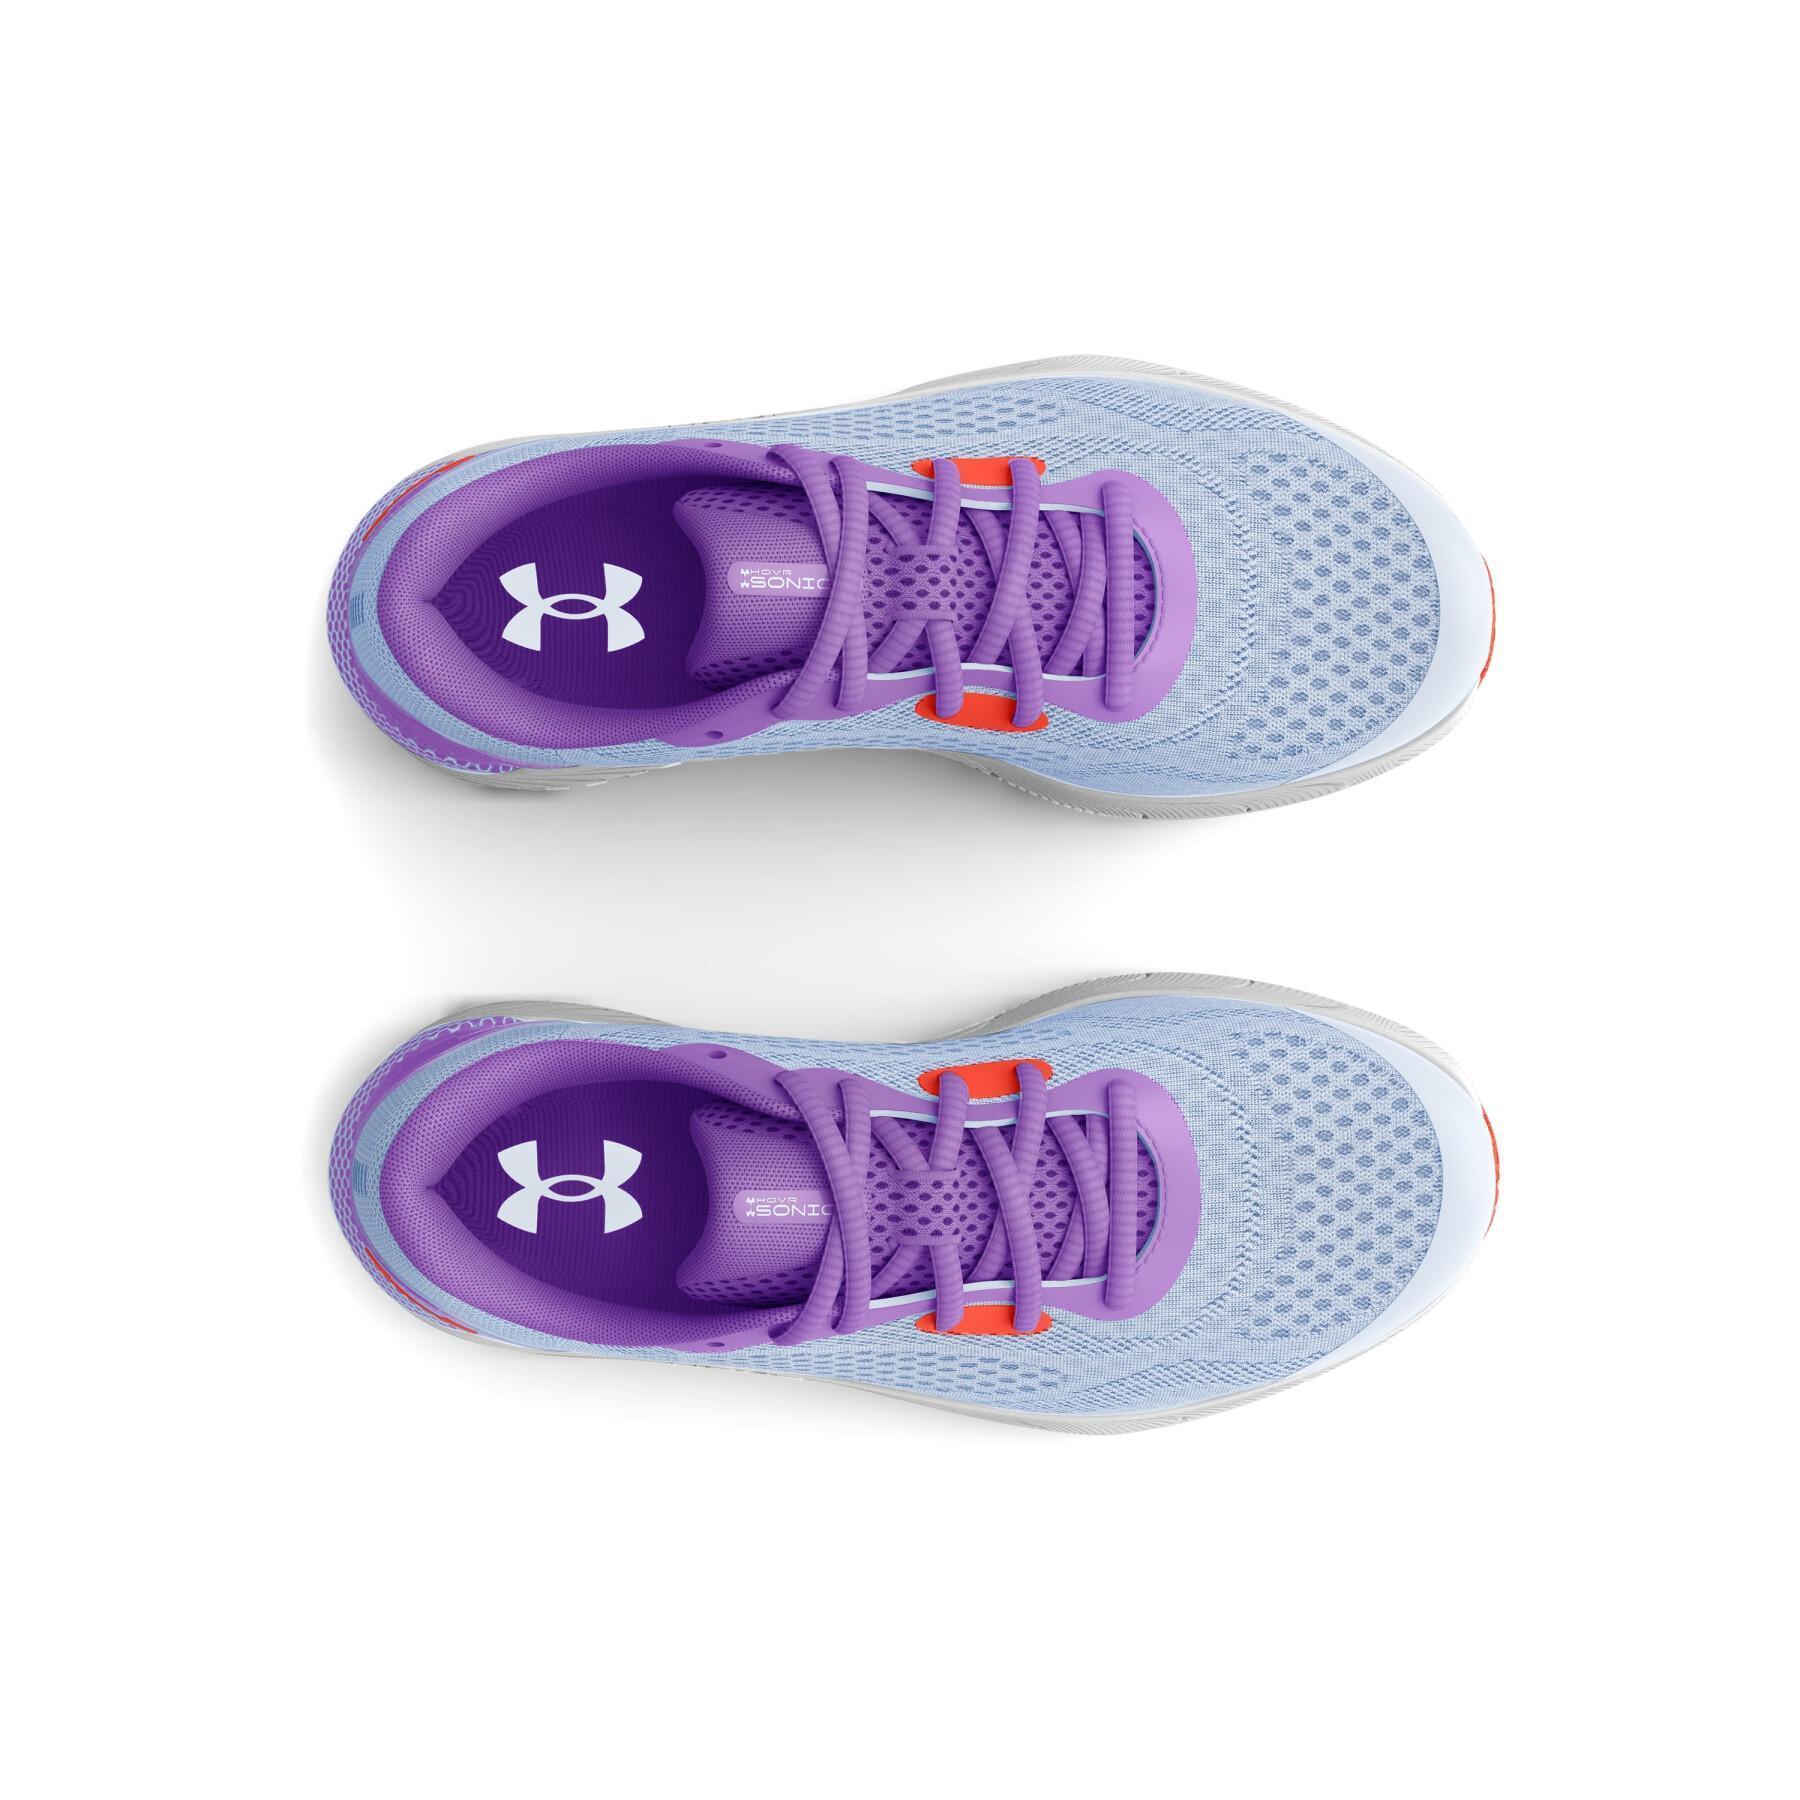 Chaussures de running fille Under Armour Hovr sonic 5